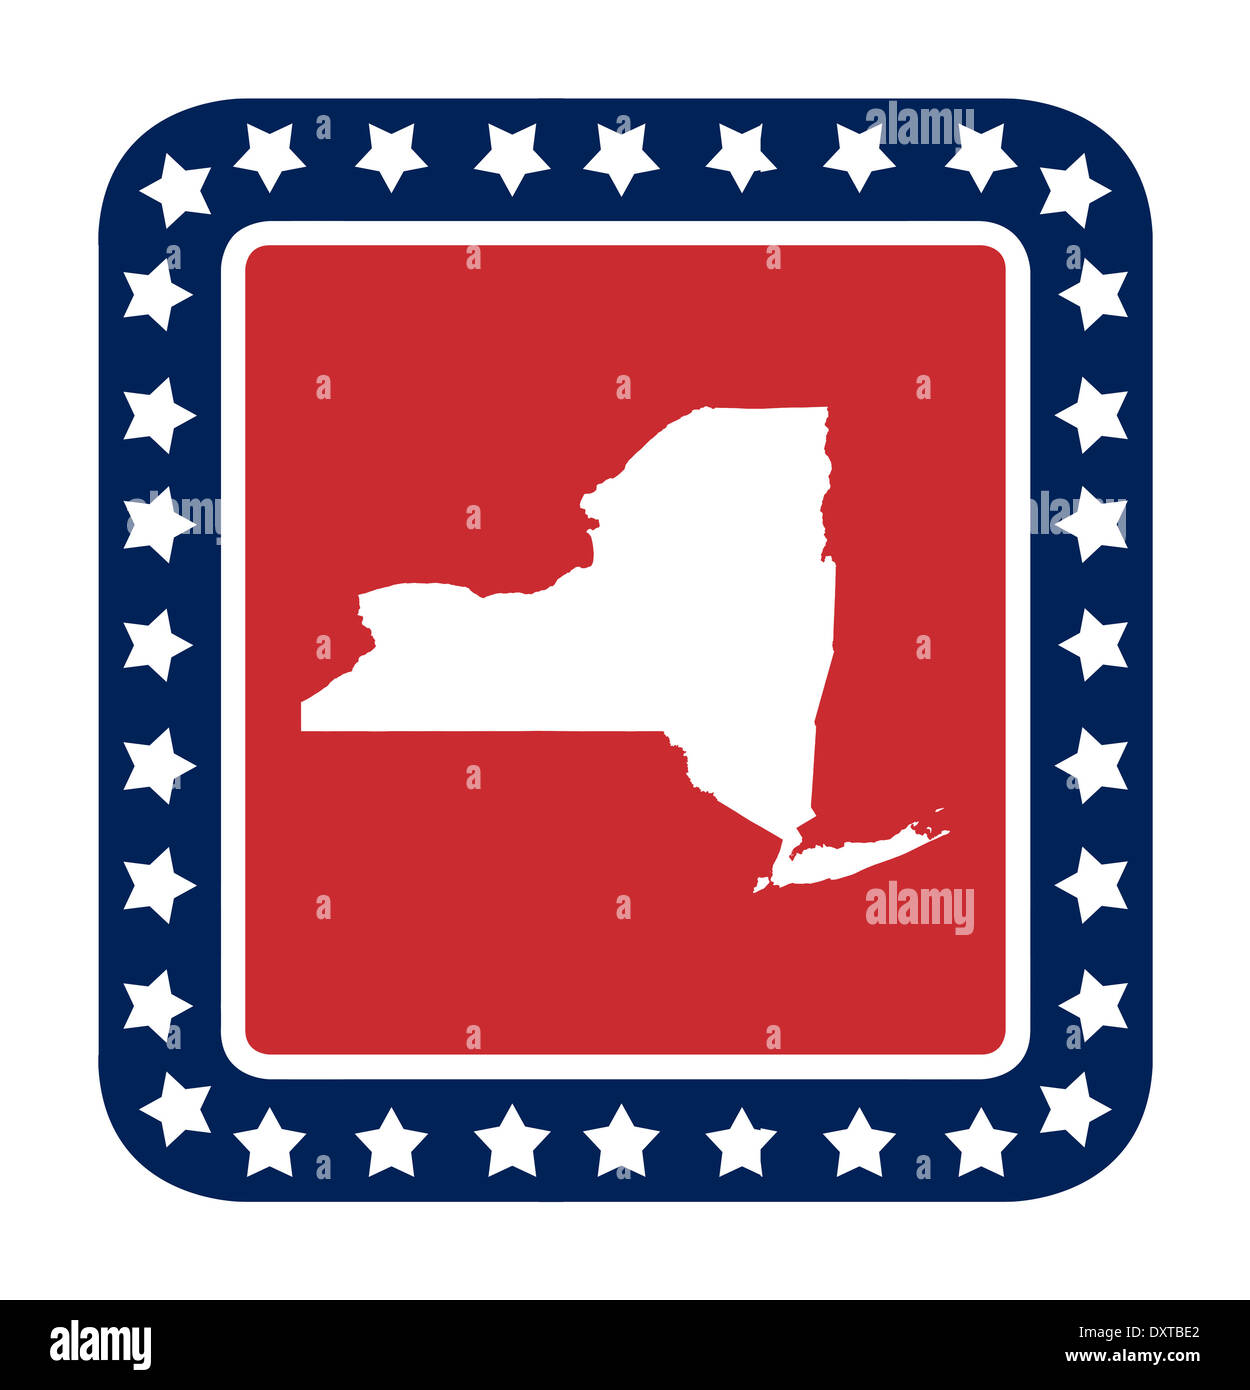 New York state button on American flag in flat web design style, isolated on white background. Stock Photo